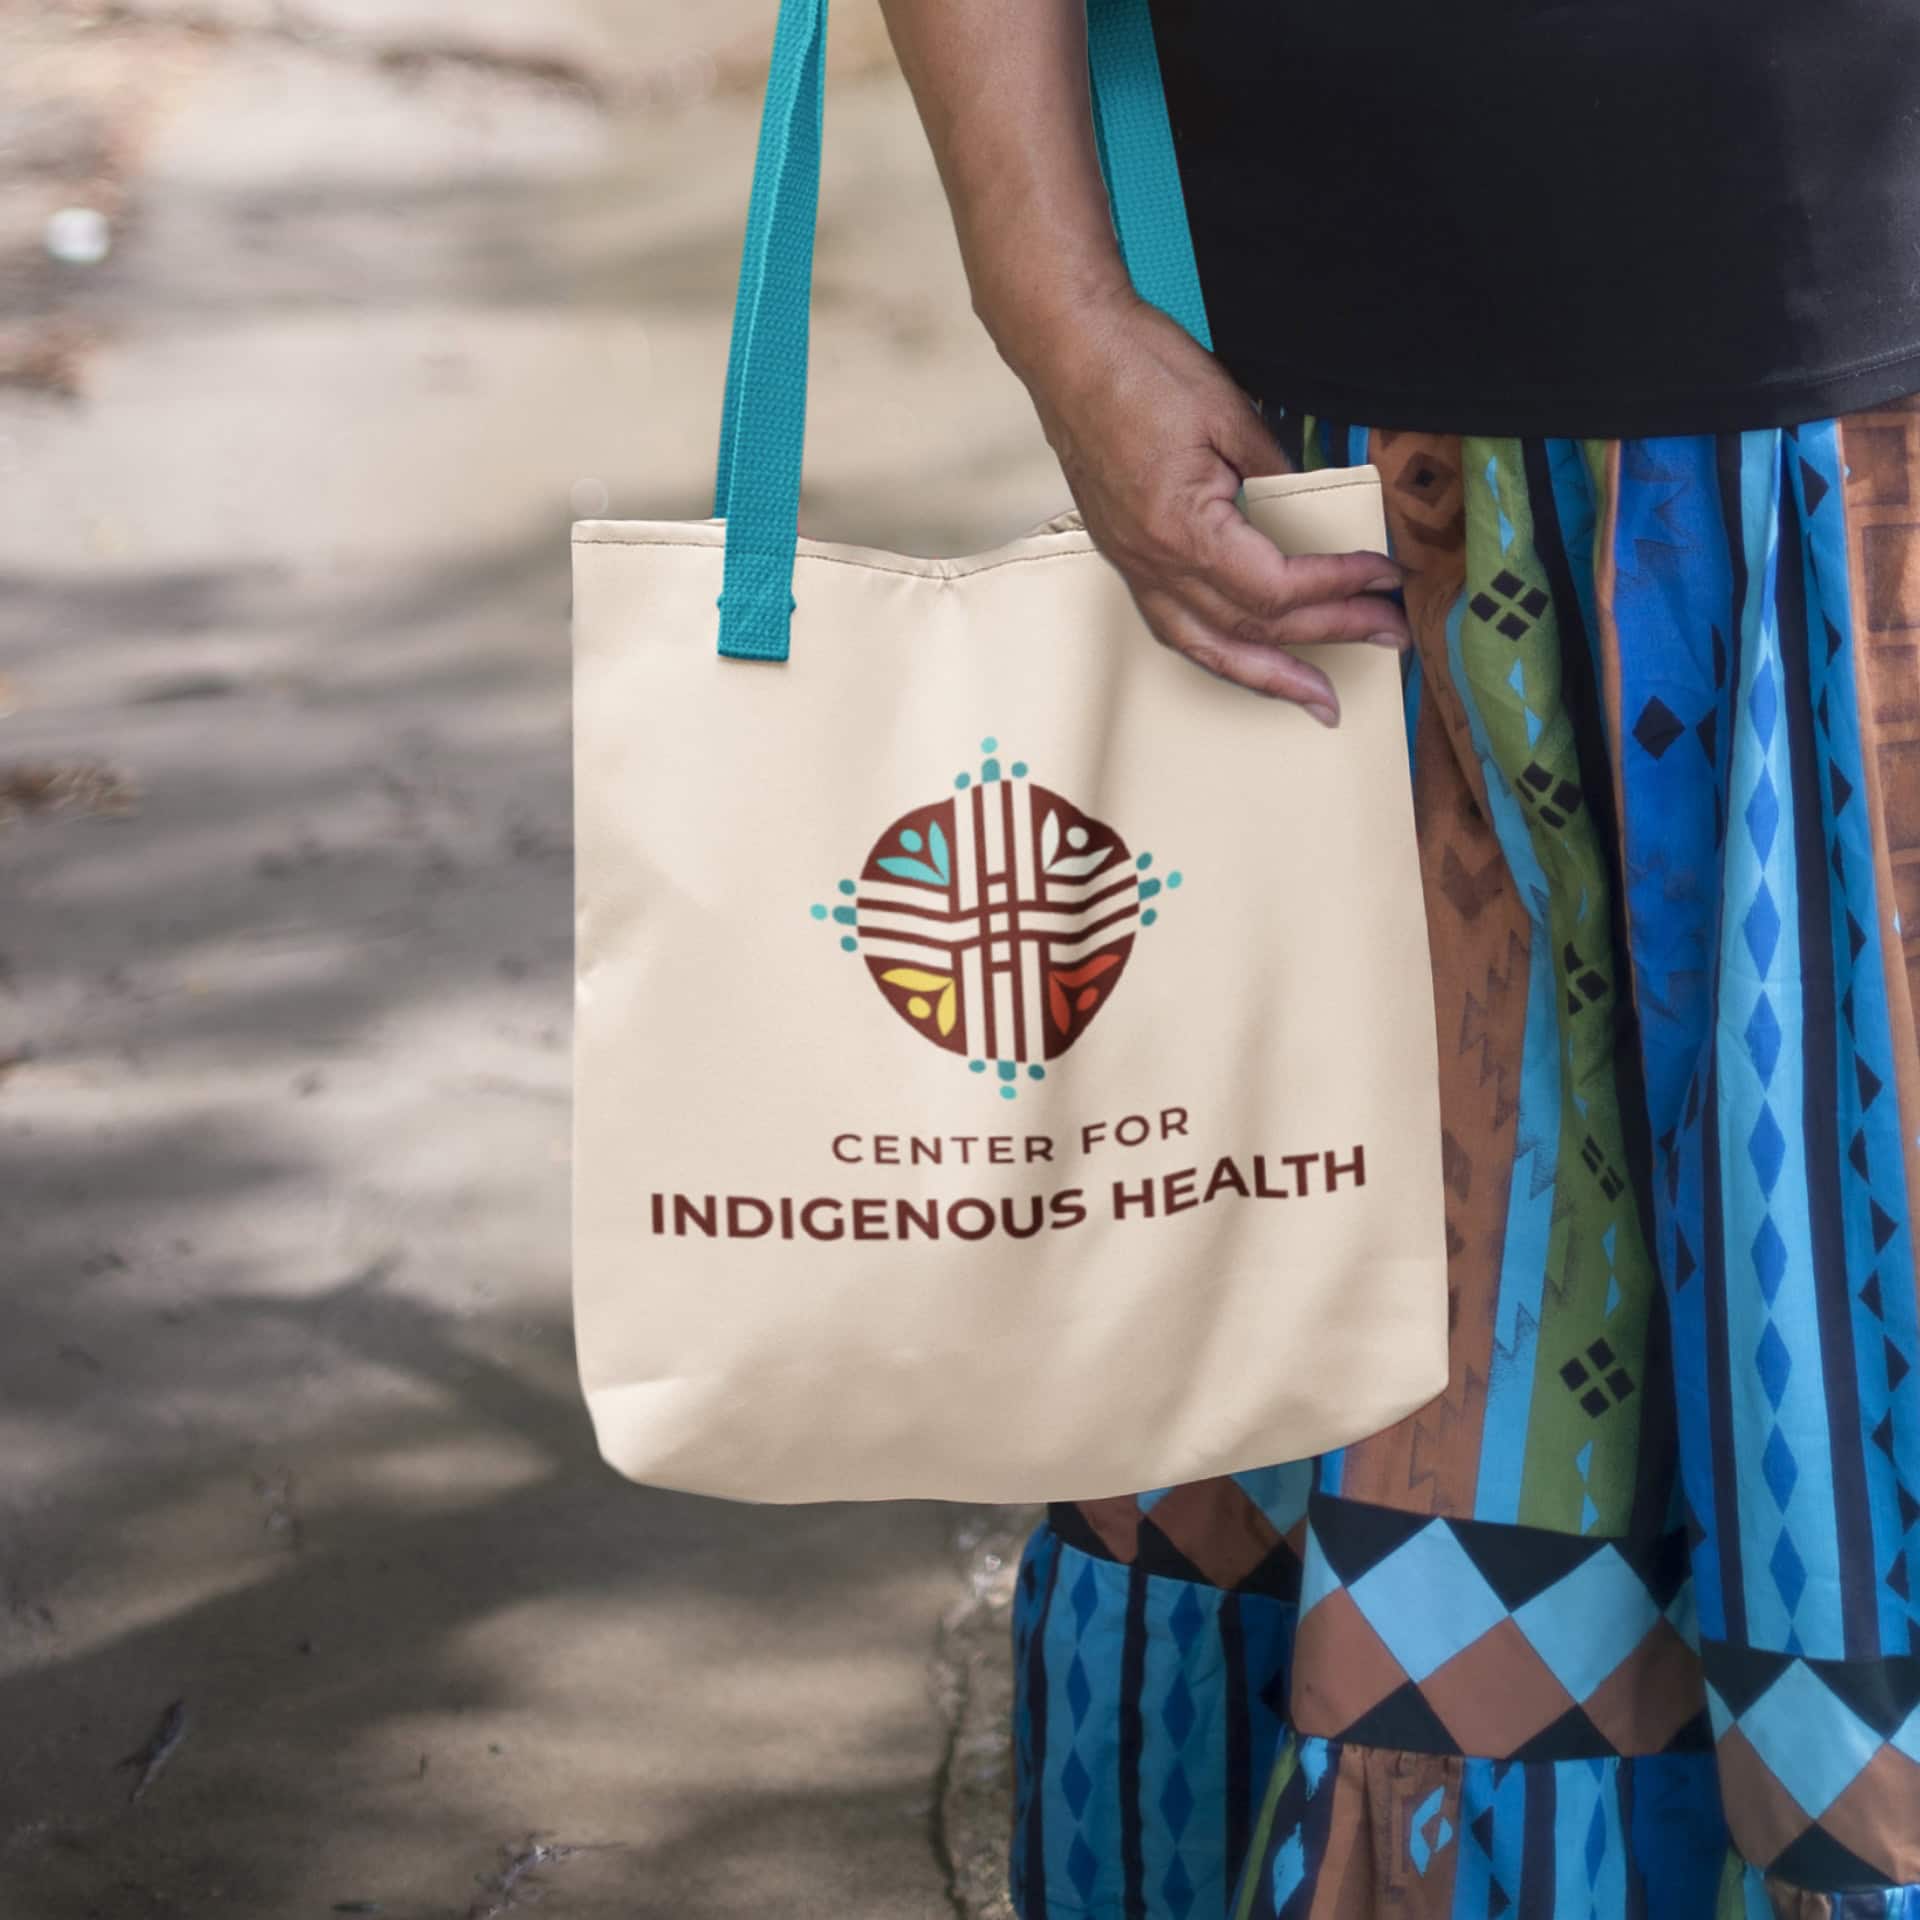 A woman carrying a bag which has the Center for Indigenous Health logo on it